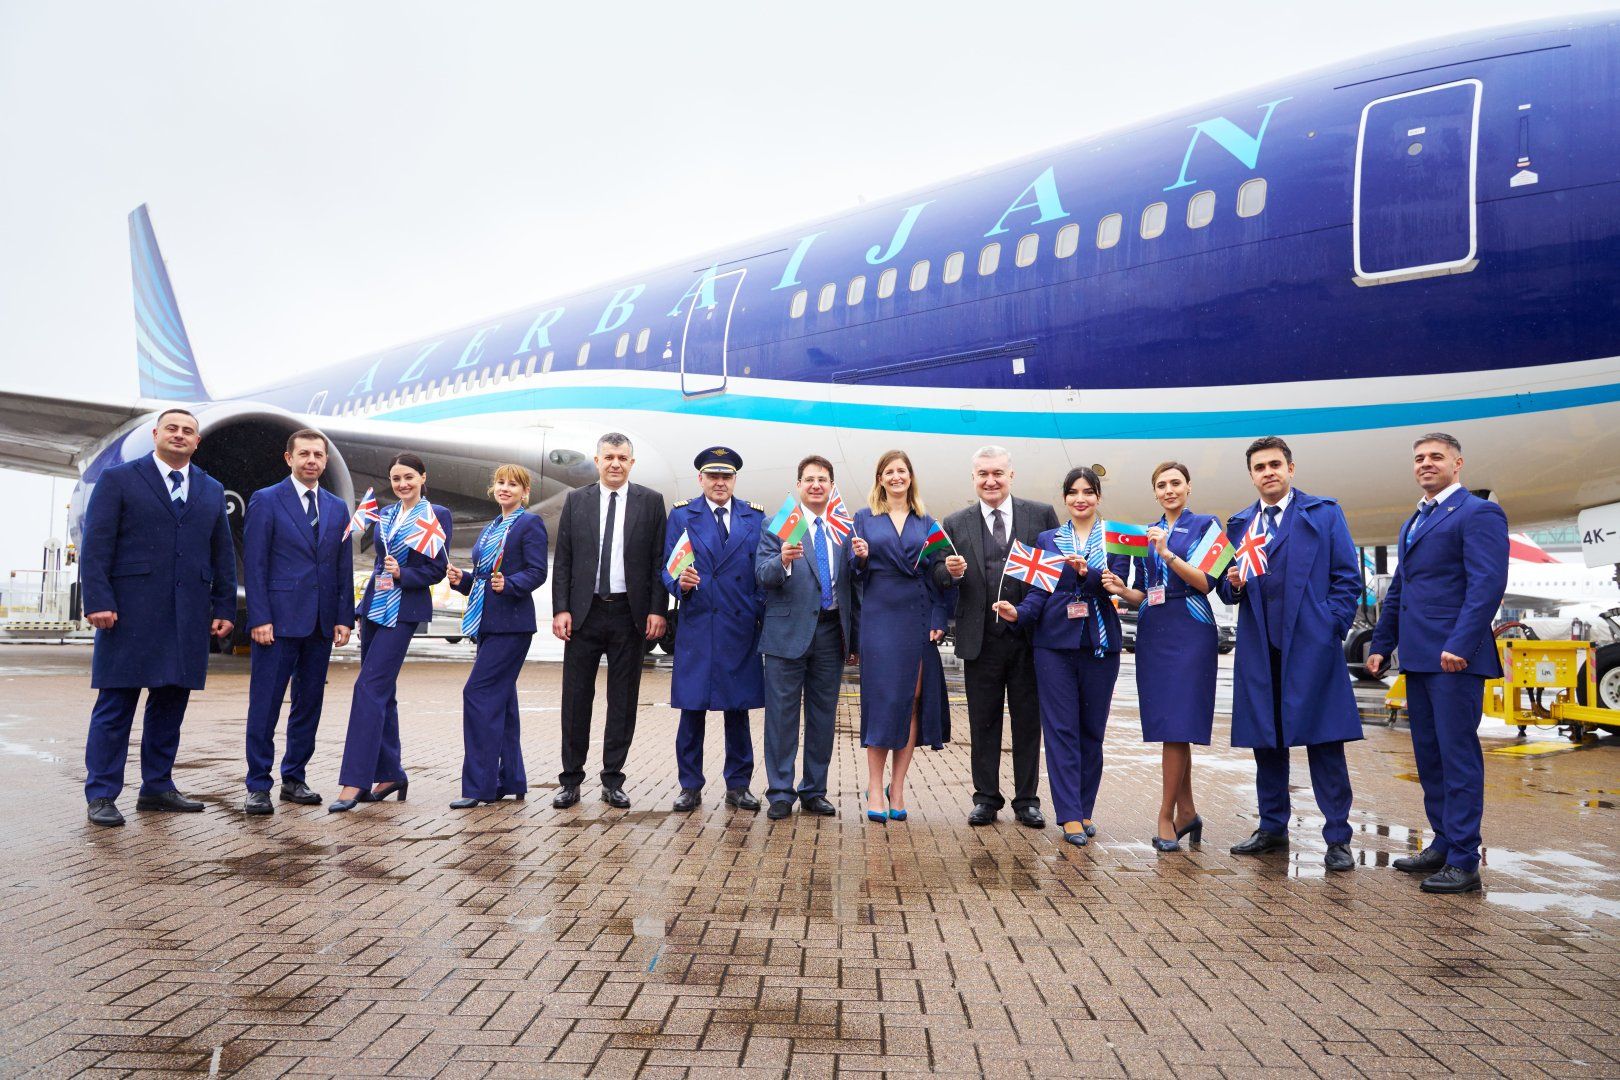 AZAL Launches Flights to Another London Airport [PHOTOS]